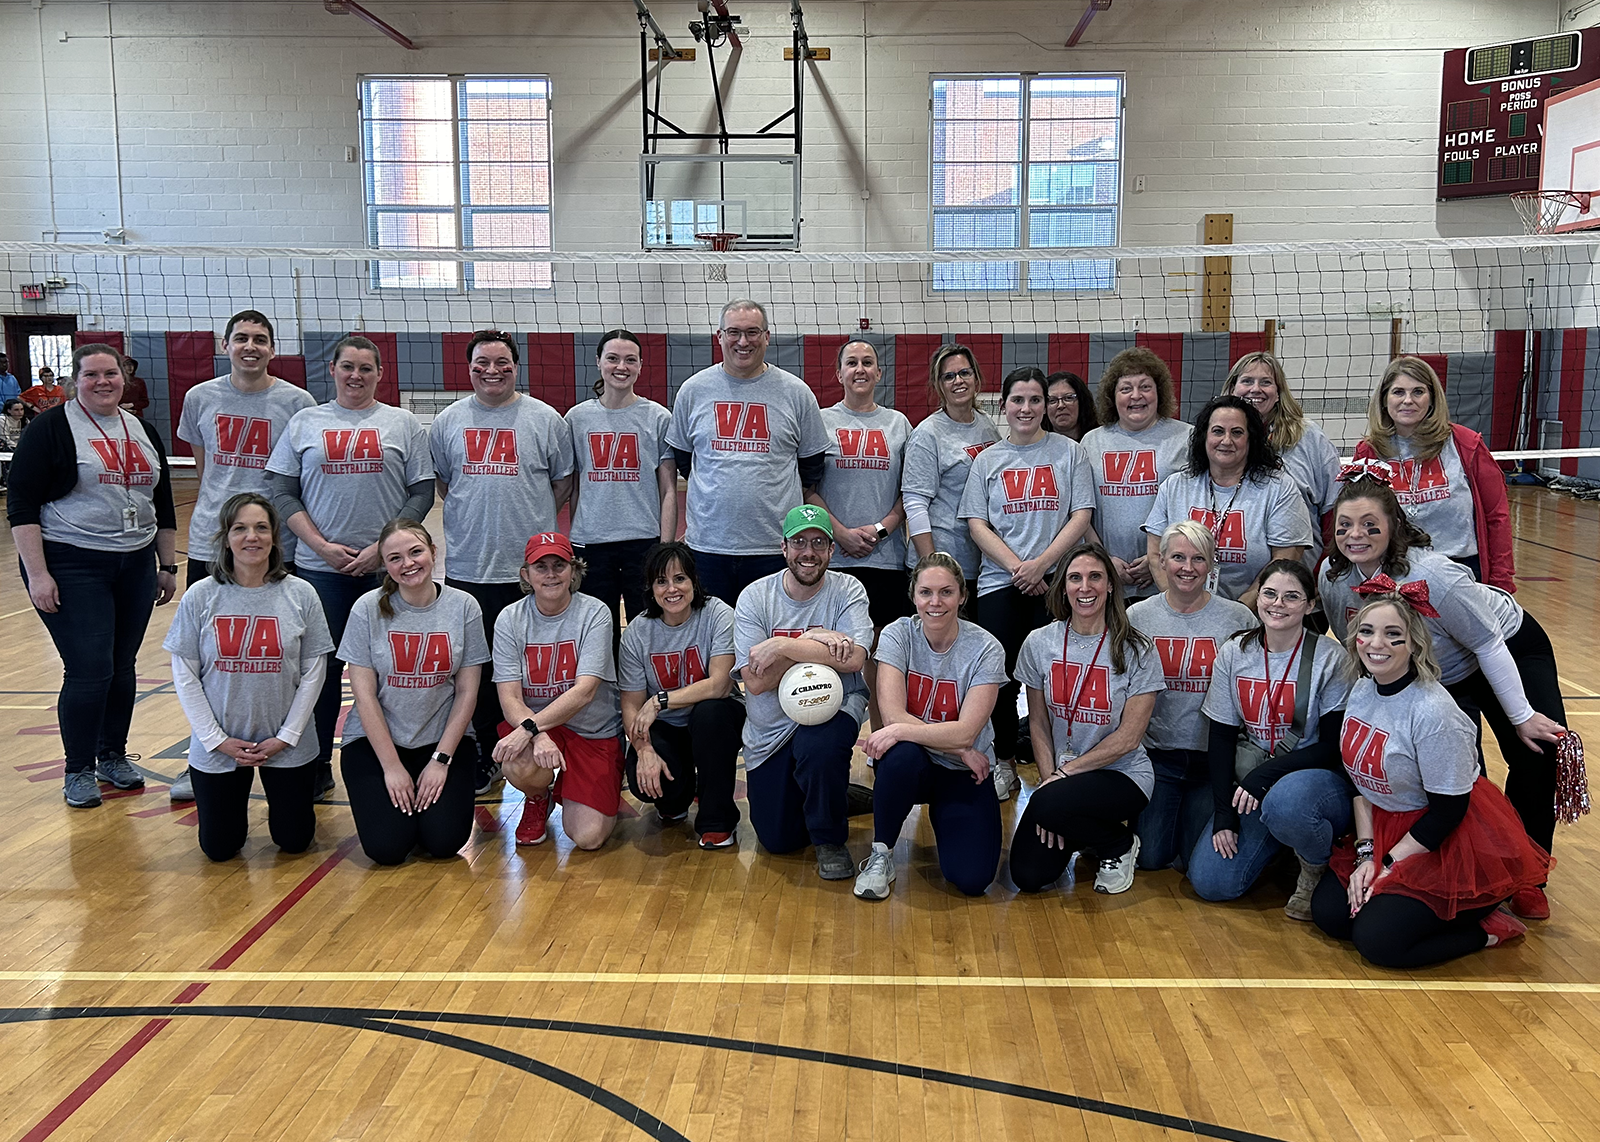 VA faculty group photo at volleyball event